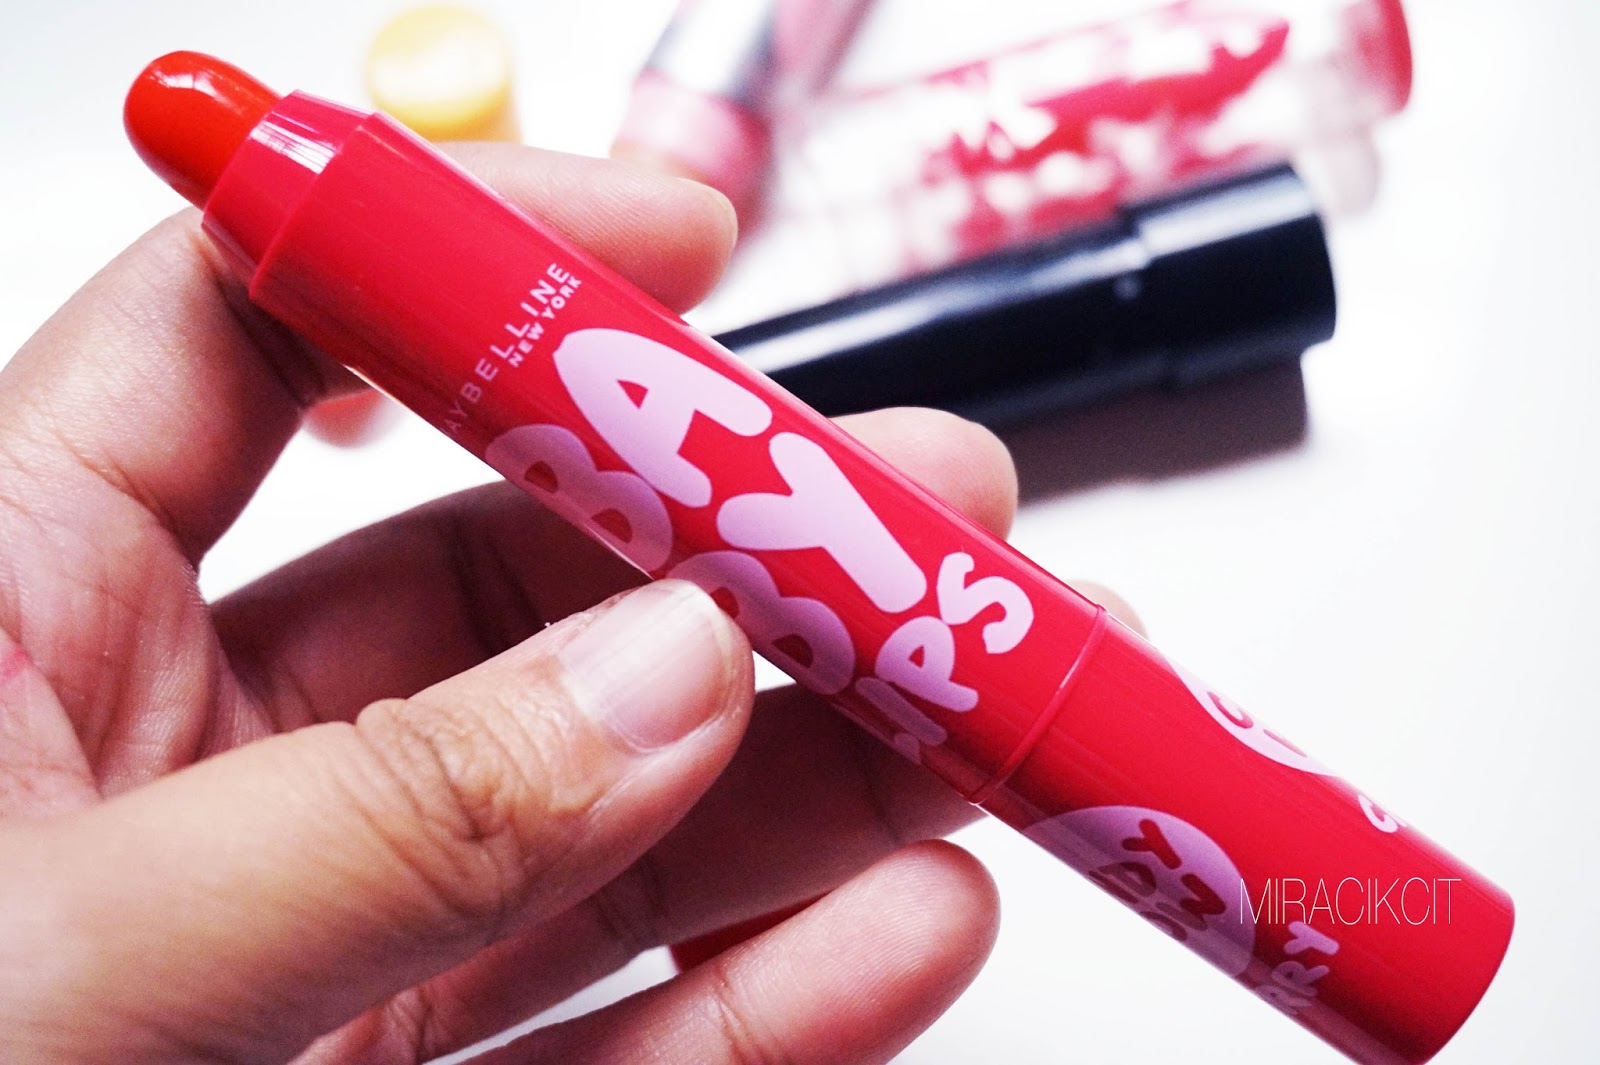 REVIEW: THE NEW BABY LIPS CANDY WOW & MY BABY LIPS ...